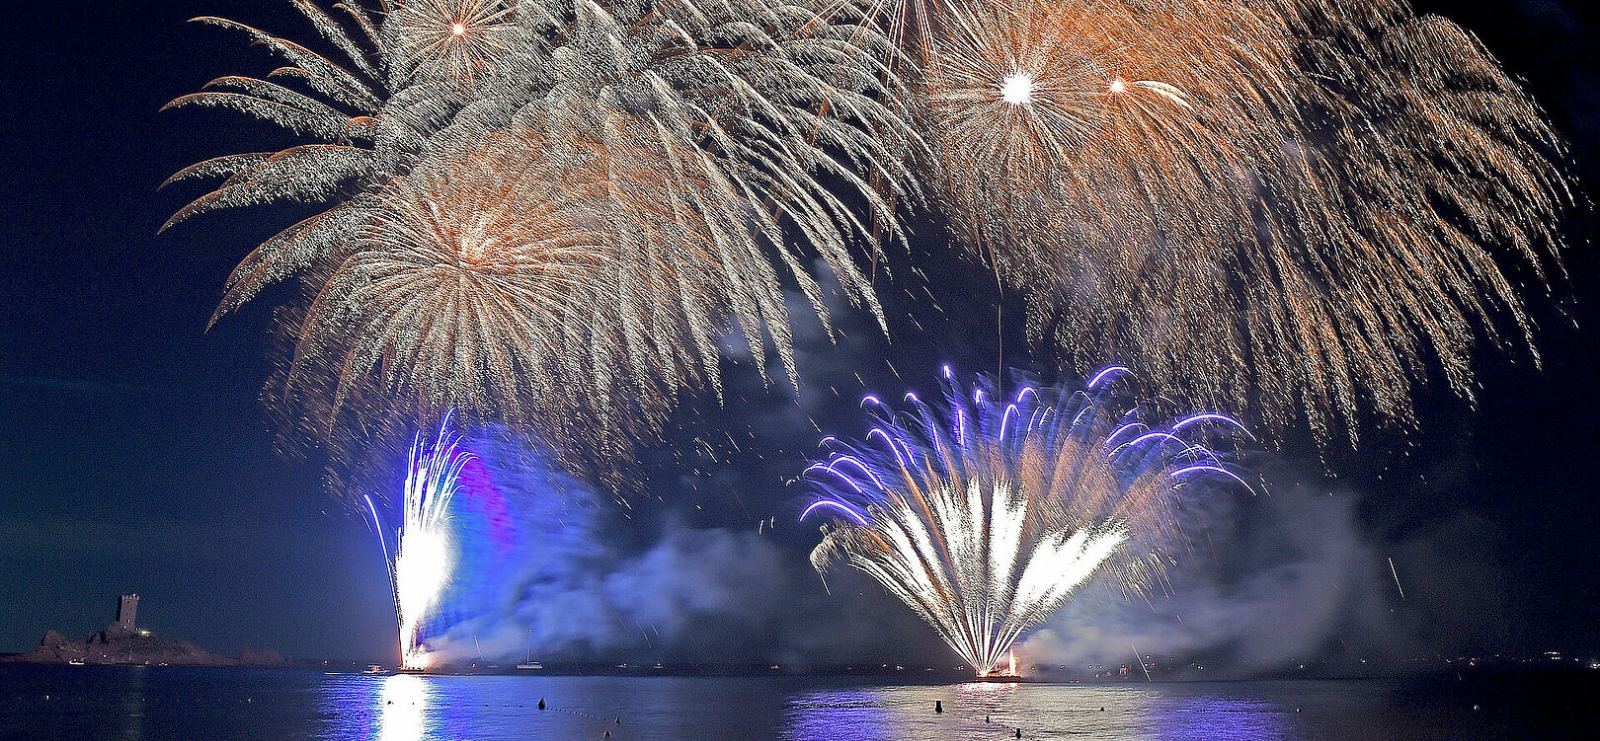 Fireworks on 10th August